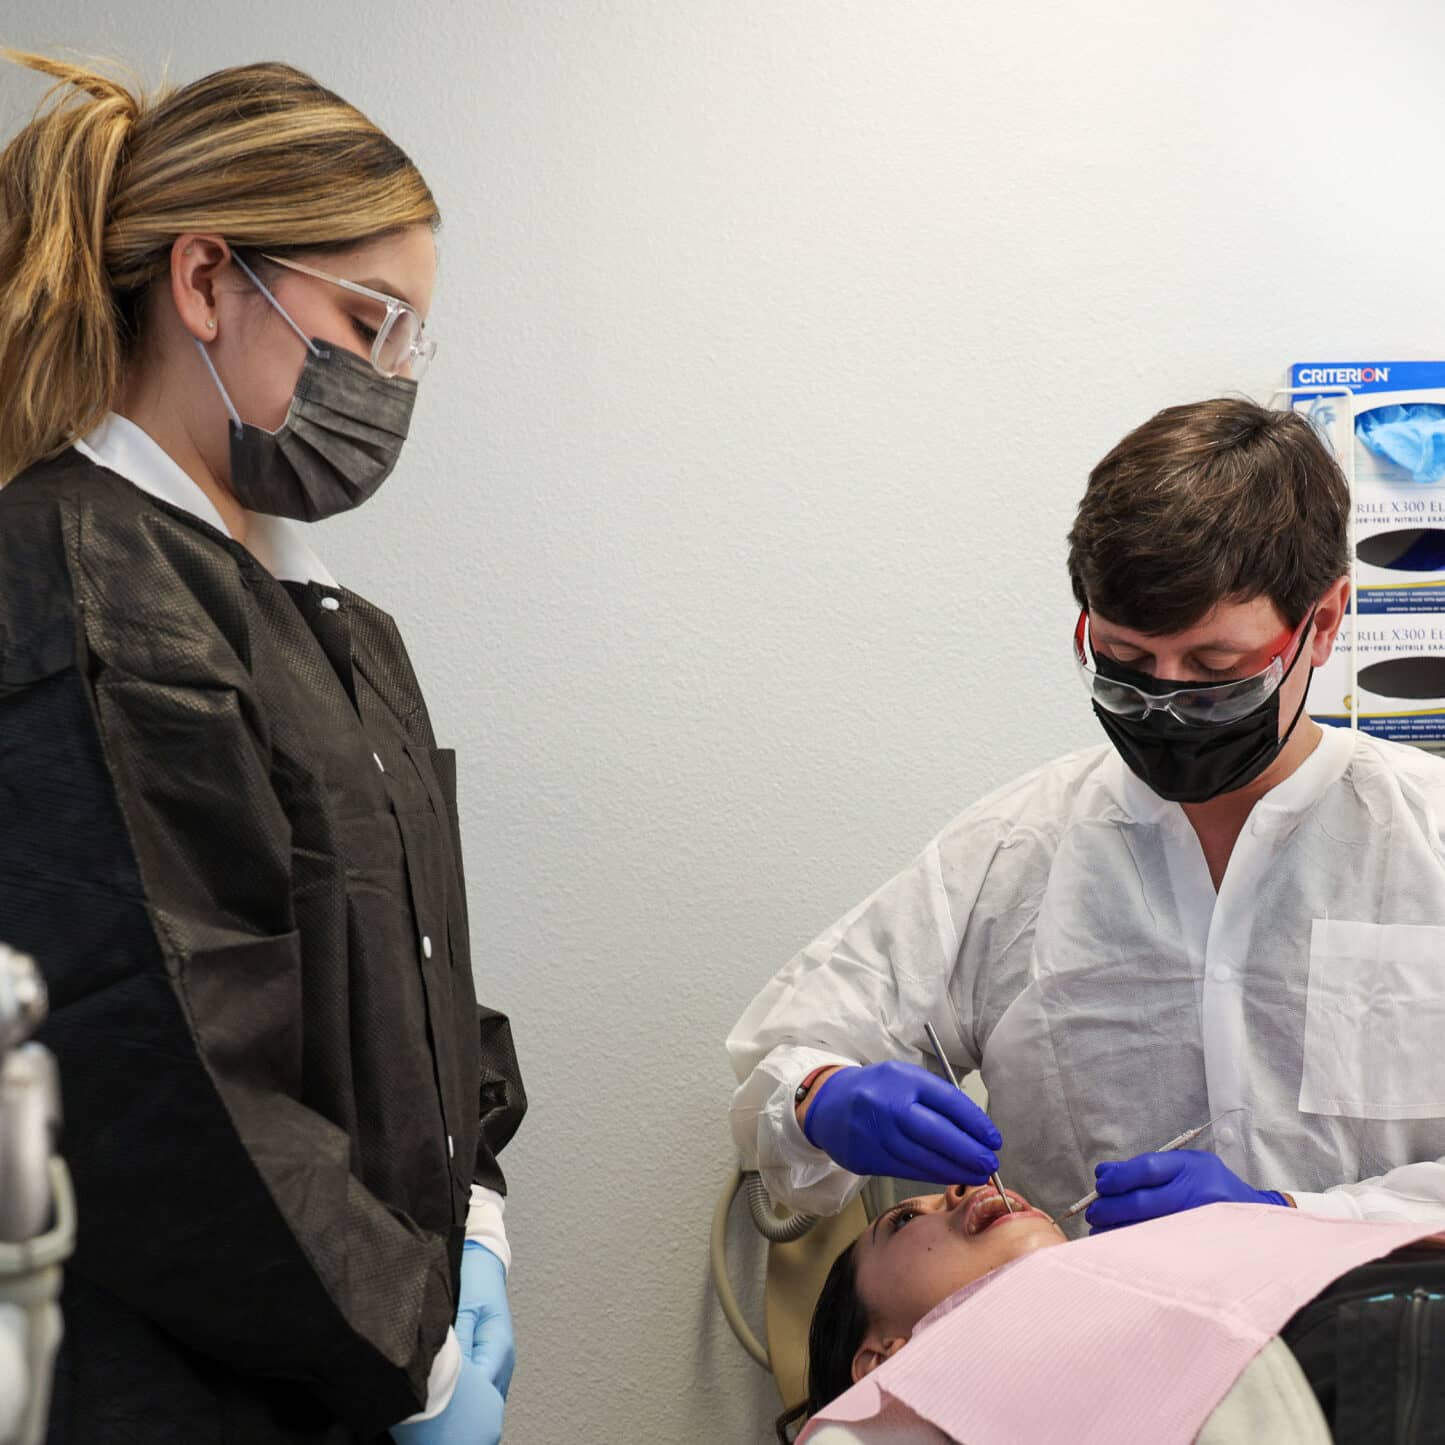 dentist and team member with patient in exam room